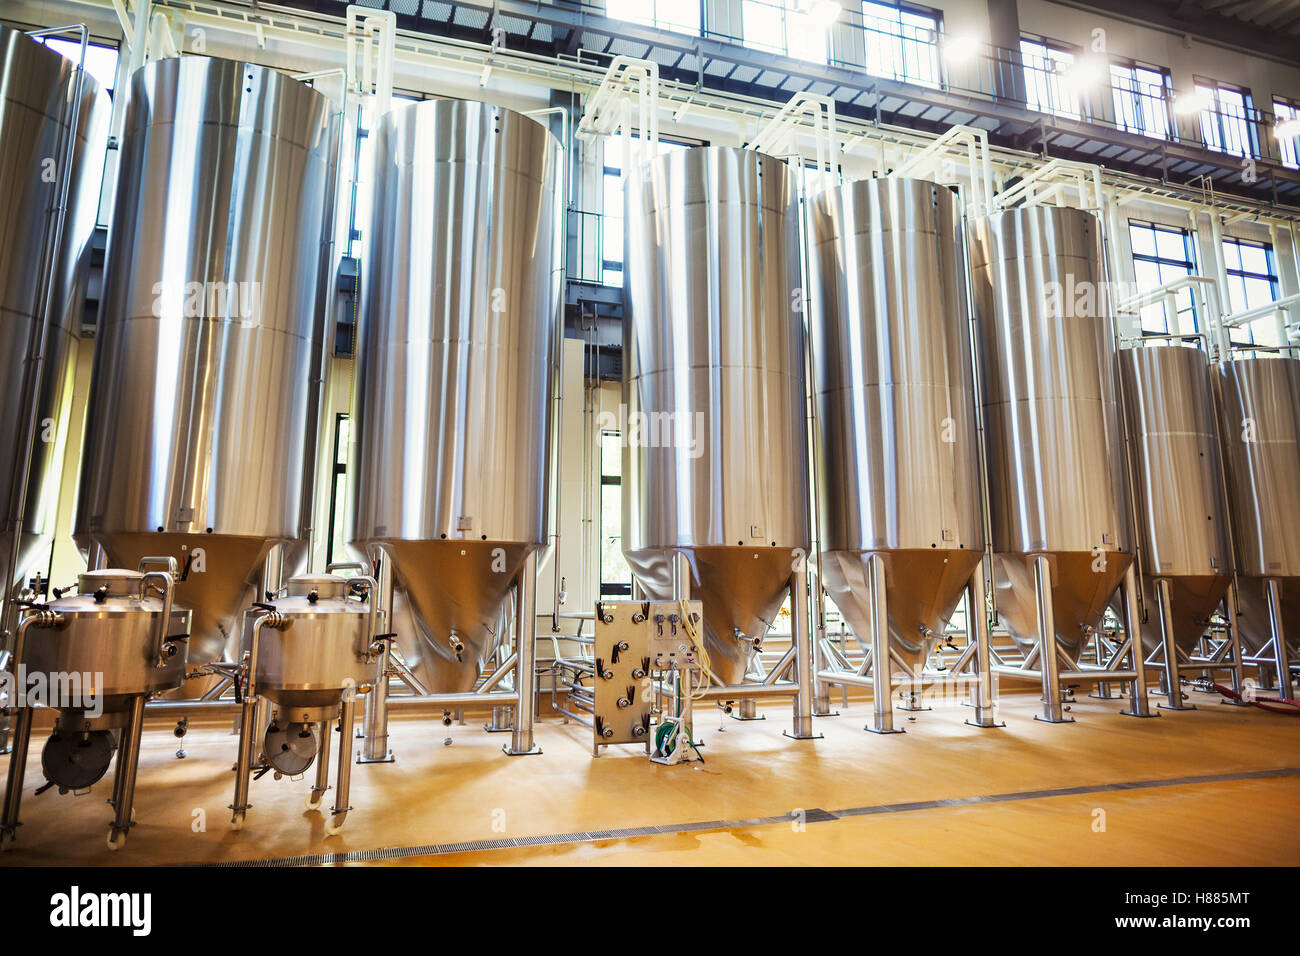 Row of large metal beer tanks in a brewery. Stock Photo